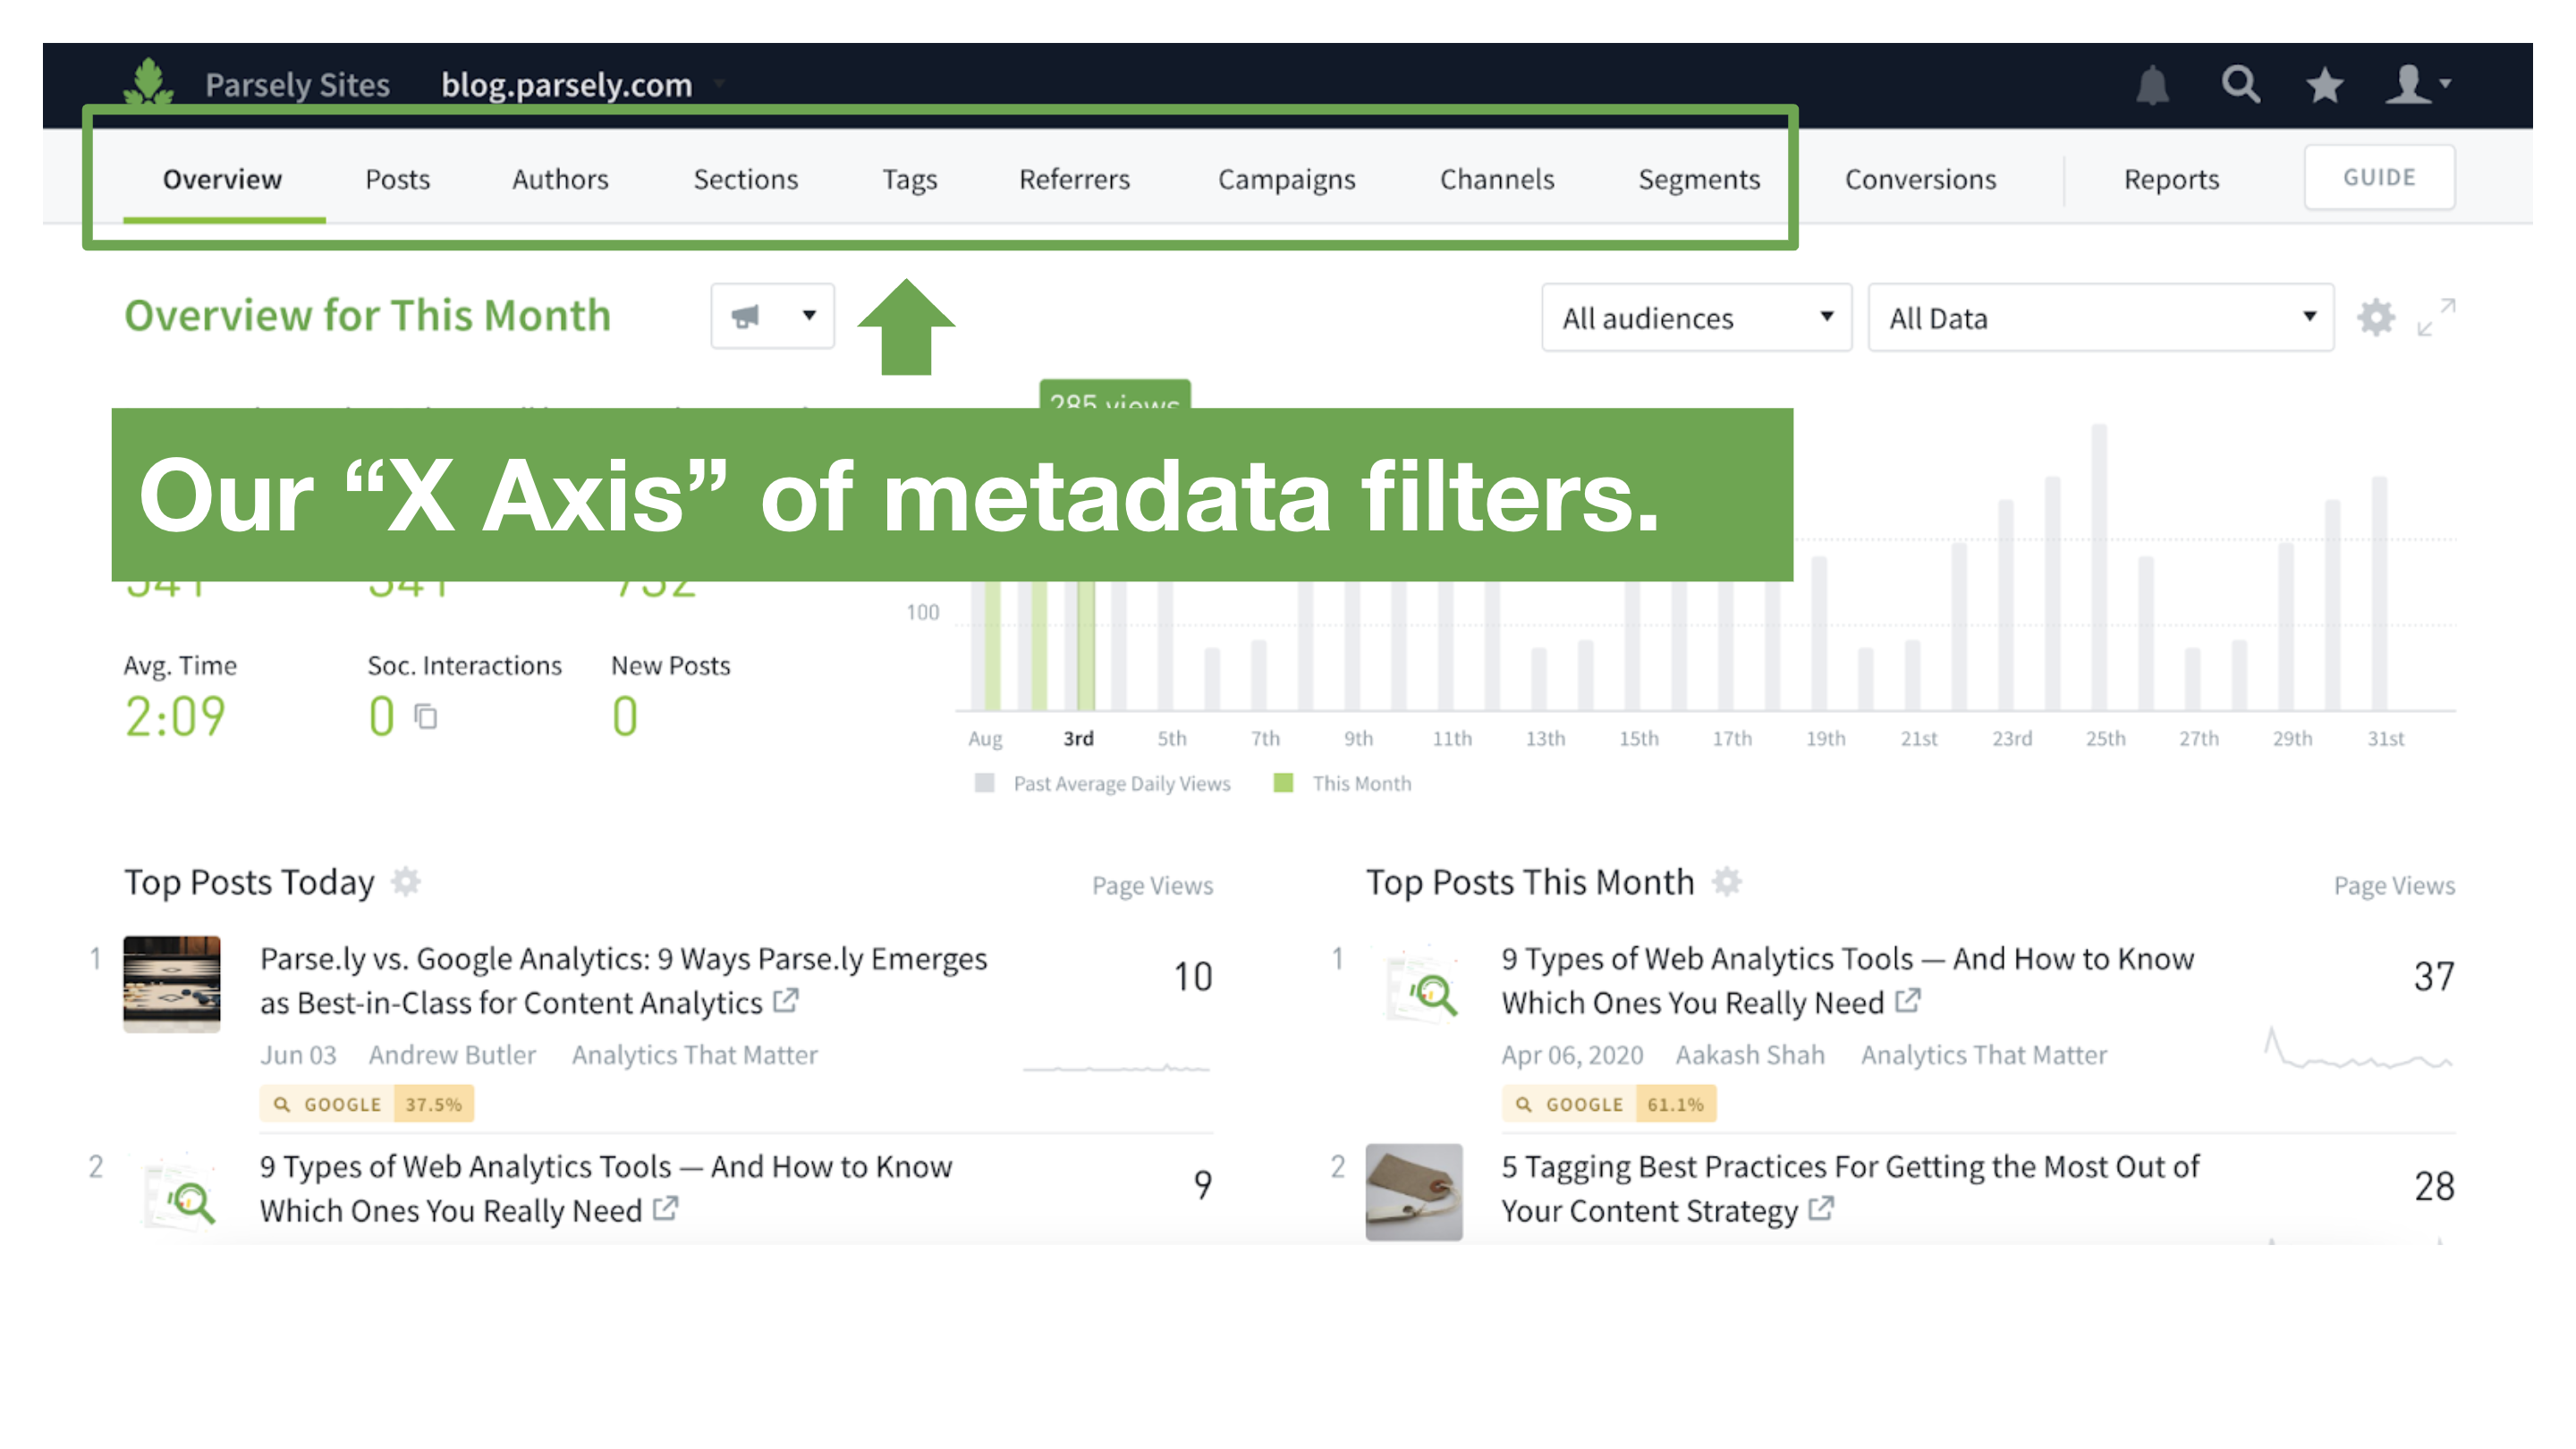 Parse.ly's "X axis" of metadata filters.